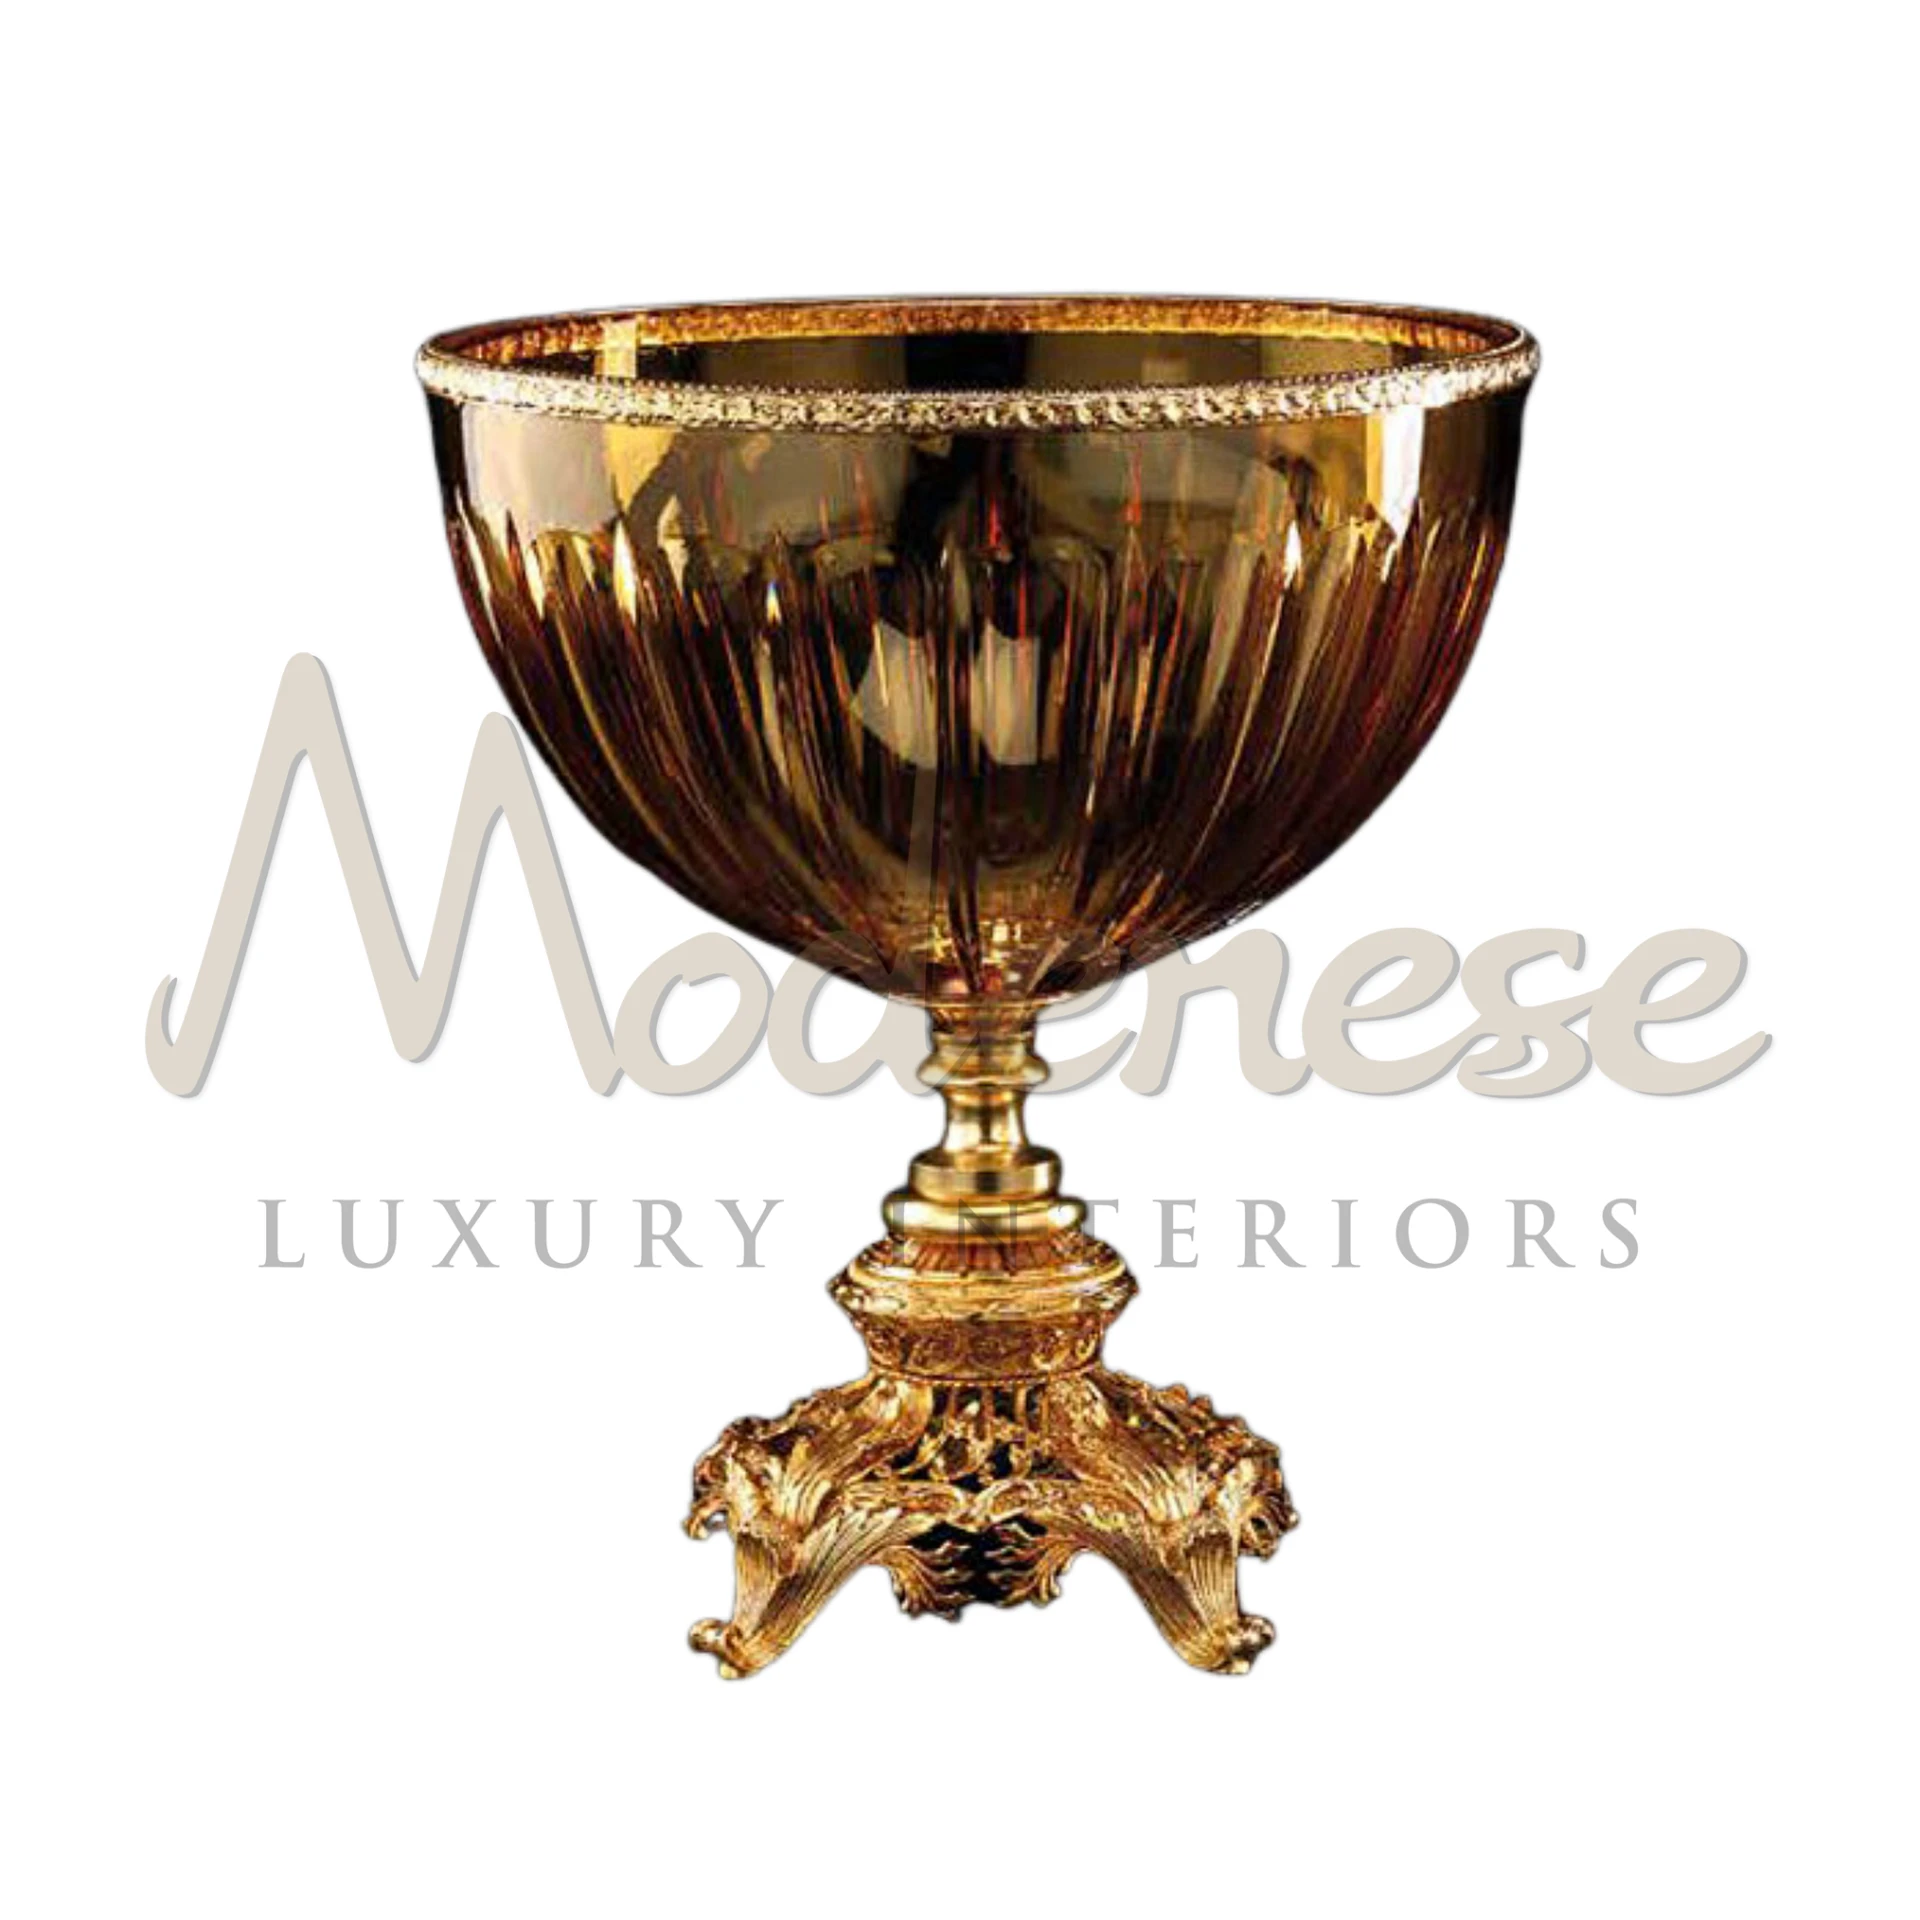 Elegant Bowl Type Crystal Vase in high-quality crystal, ideal for luxury interior design, suits classic and baroque styles